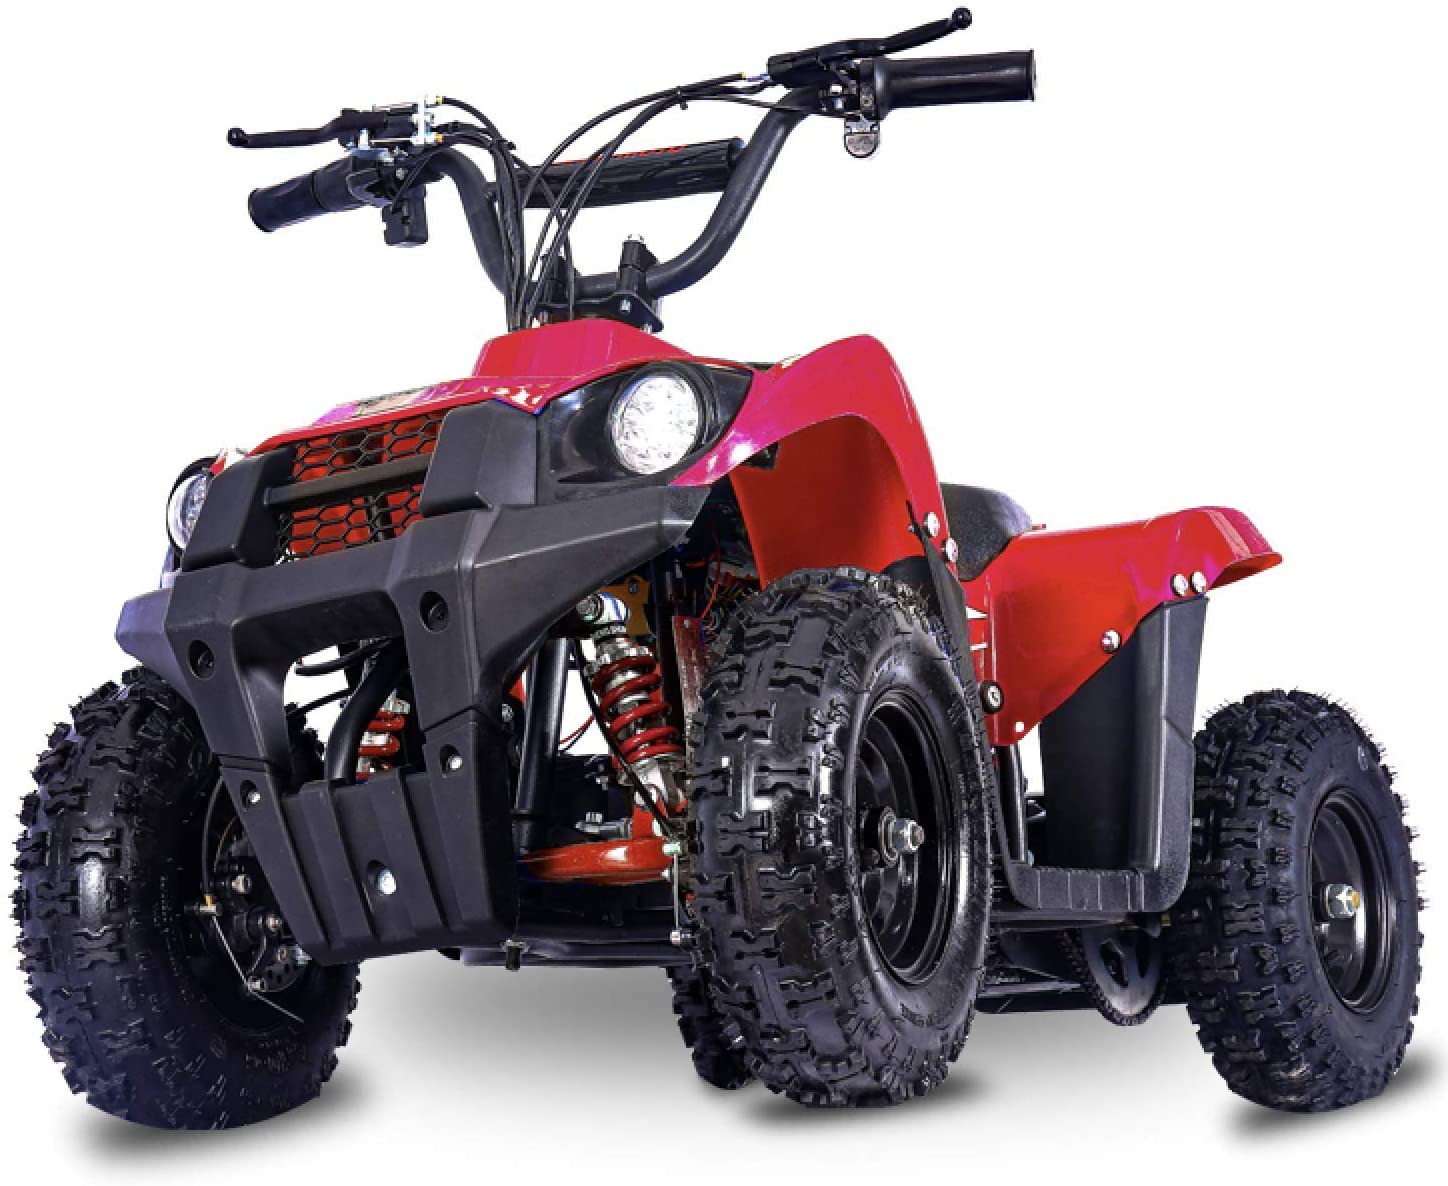 FIT Right Monster 36Volt 500Watt Electric Mini ATV Kids 4 Wheeler Kids Quad Off Road Vehicle with Reverse and Working Headlight. (Red)